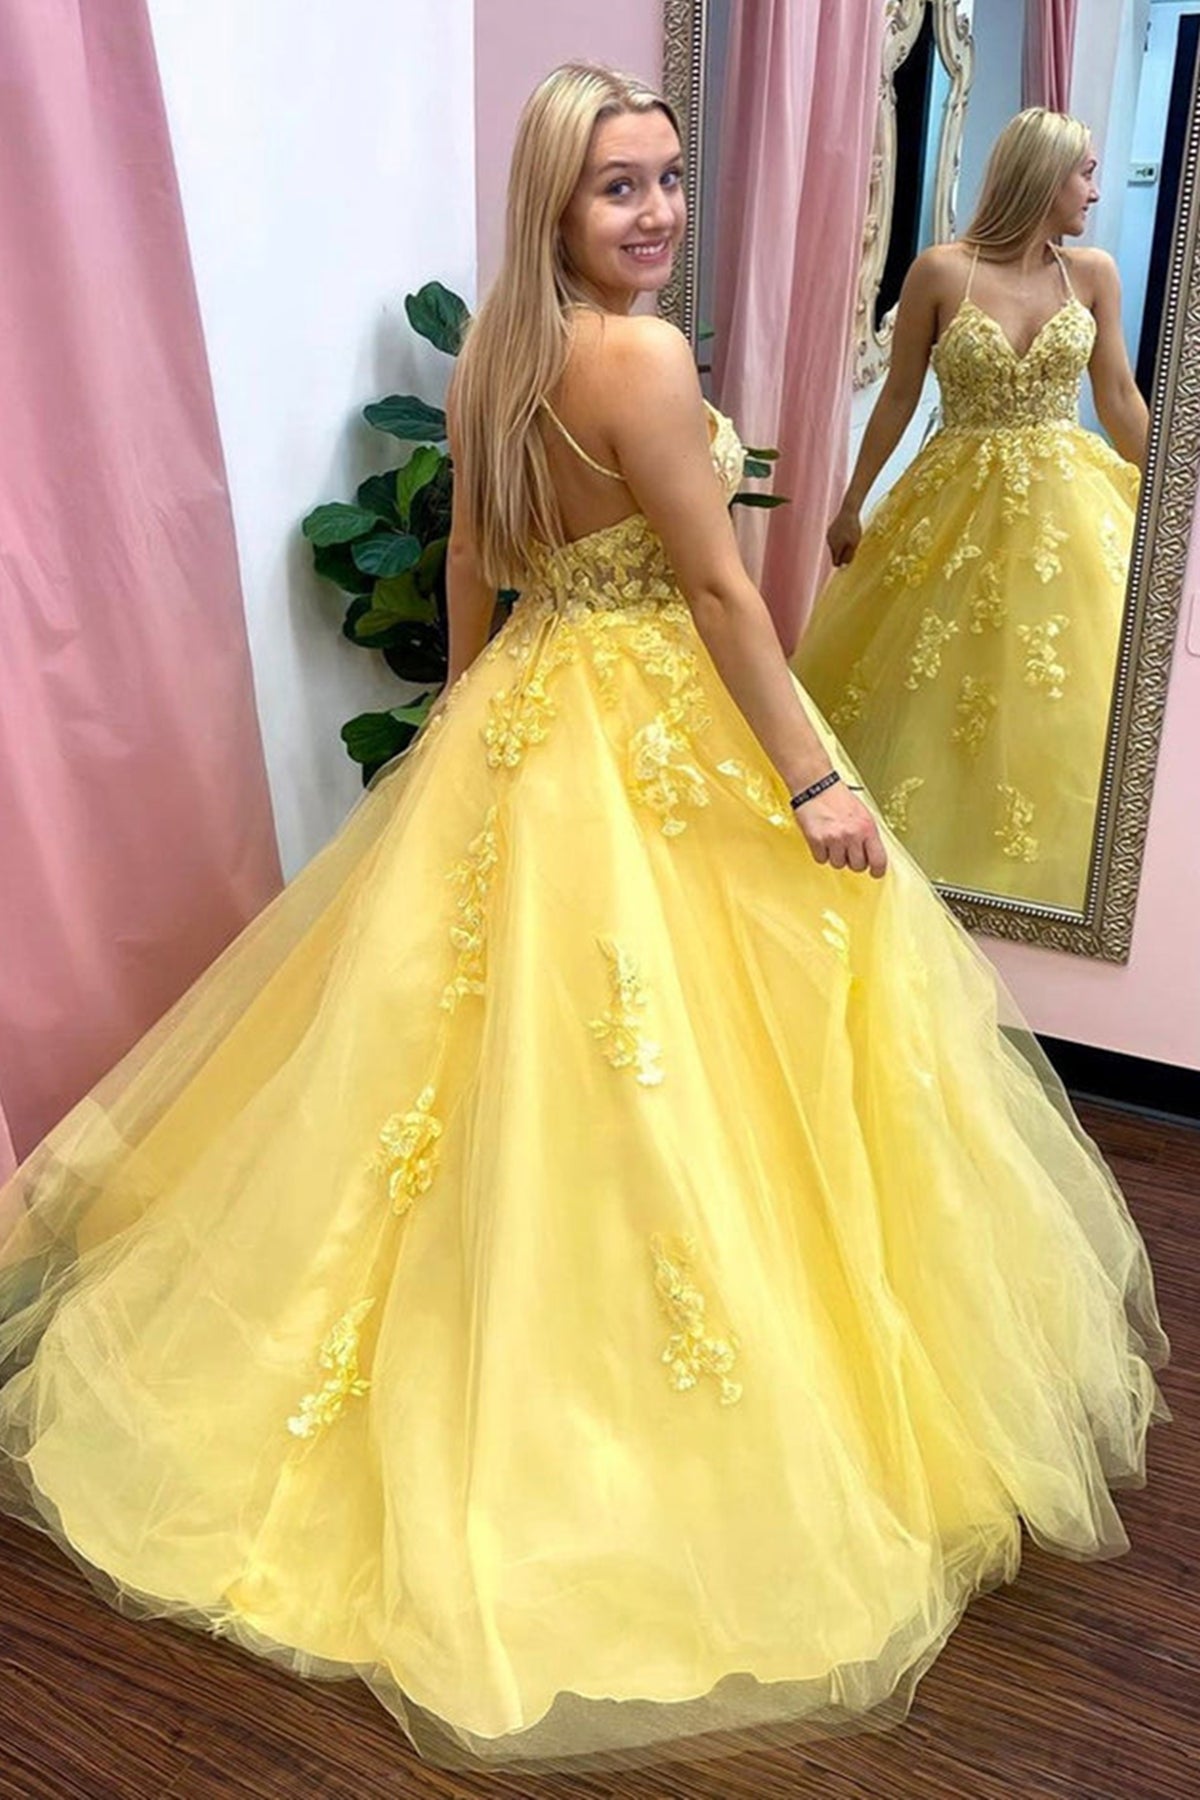 Fairytale frill-layered maxi dress in vivid yellow ➤➤ Milla Dresses - USA,  Worldwide delivery